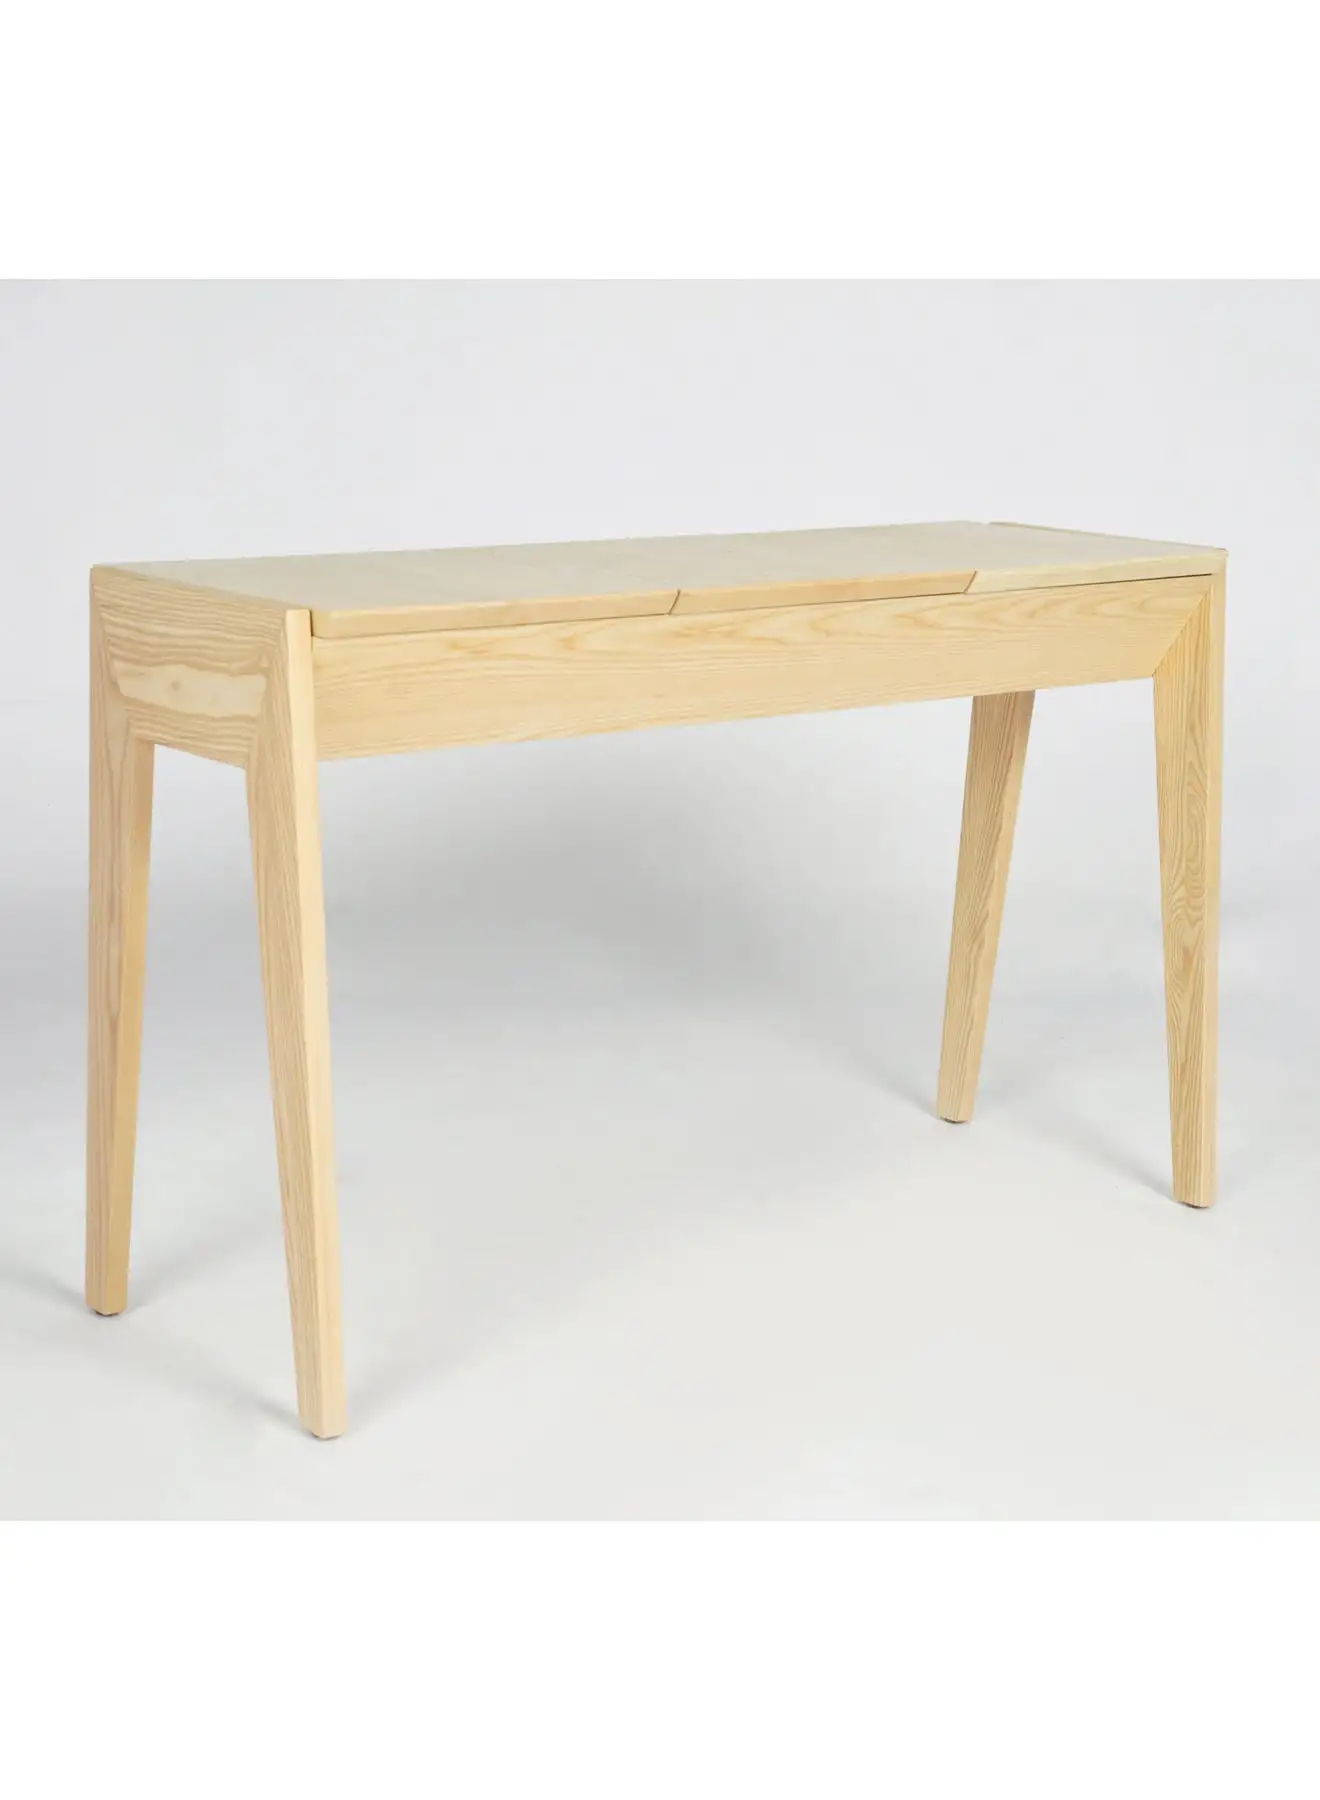 Switch Office Desk Computer Table Or Study Table - Natural 119 X 45 X 74 Home Office For Laptop Table